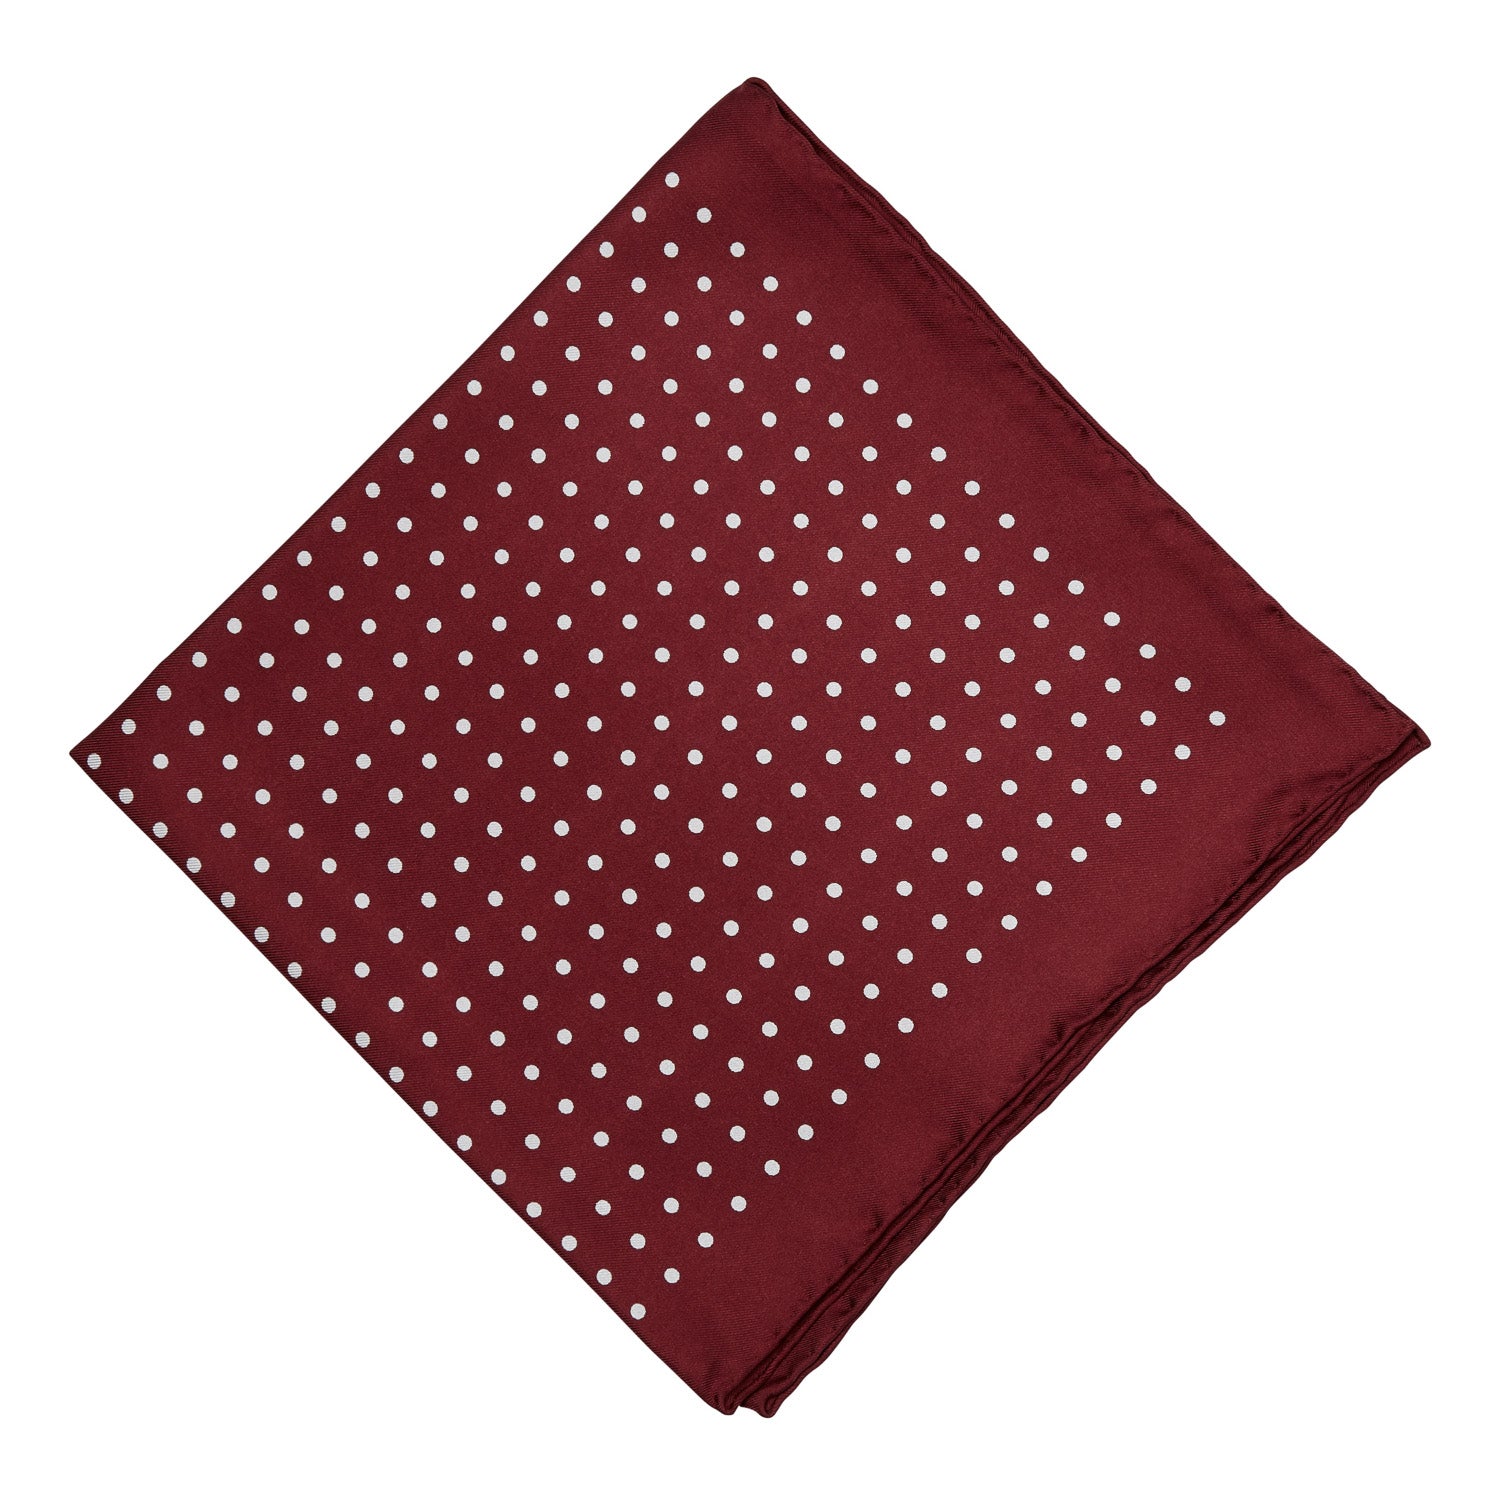 Sovereign Grade 100% Silk Burgundy London Dot pocket square from KirbyAllison.com, perfect for adding formality to any outfit.